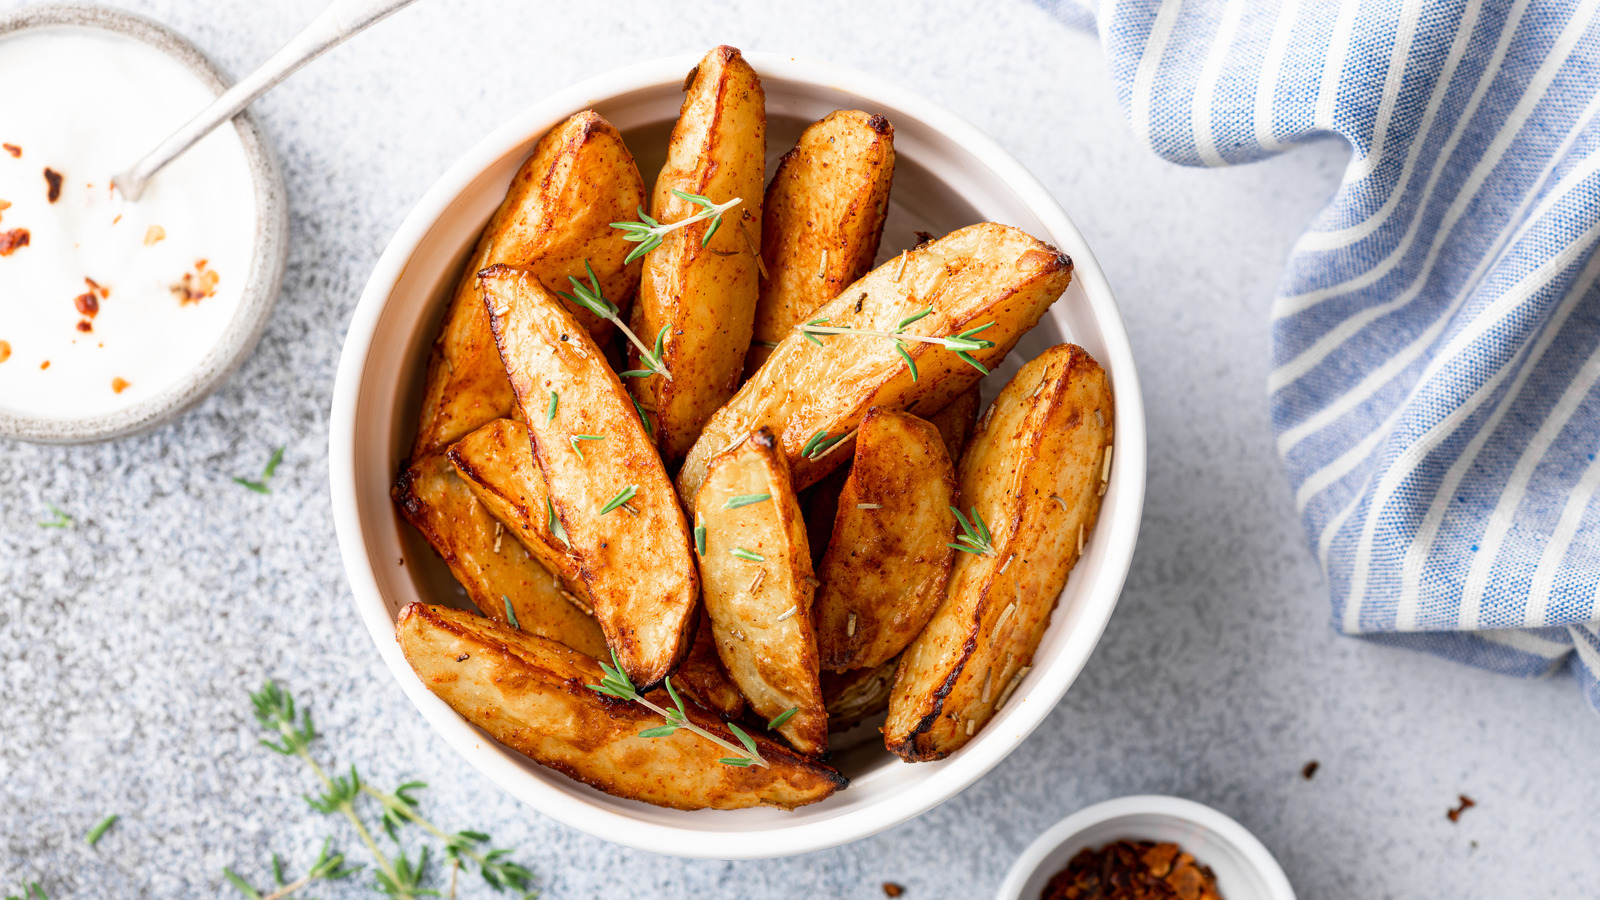 https://www.tastingtable.com/img/gallery/make-easy-potato-wedges-with-a-kitchen-tool-you-might-already-own/l-intro-1680806467.jpg